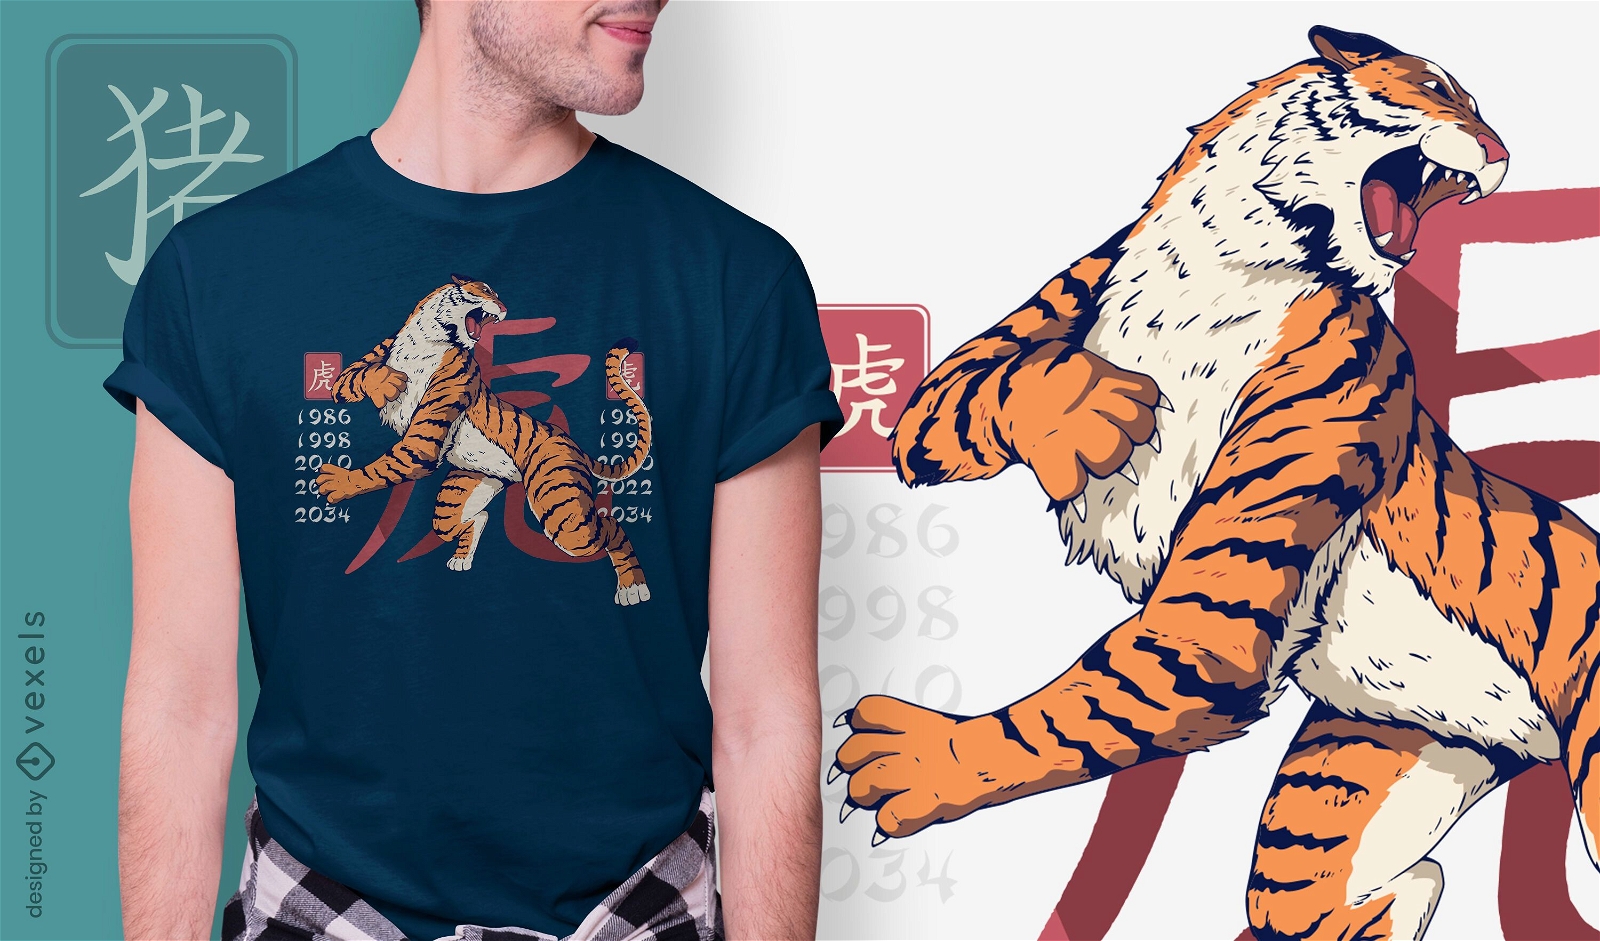 Year of the tiger t-shirt design